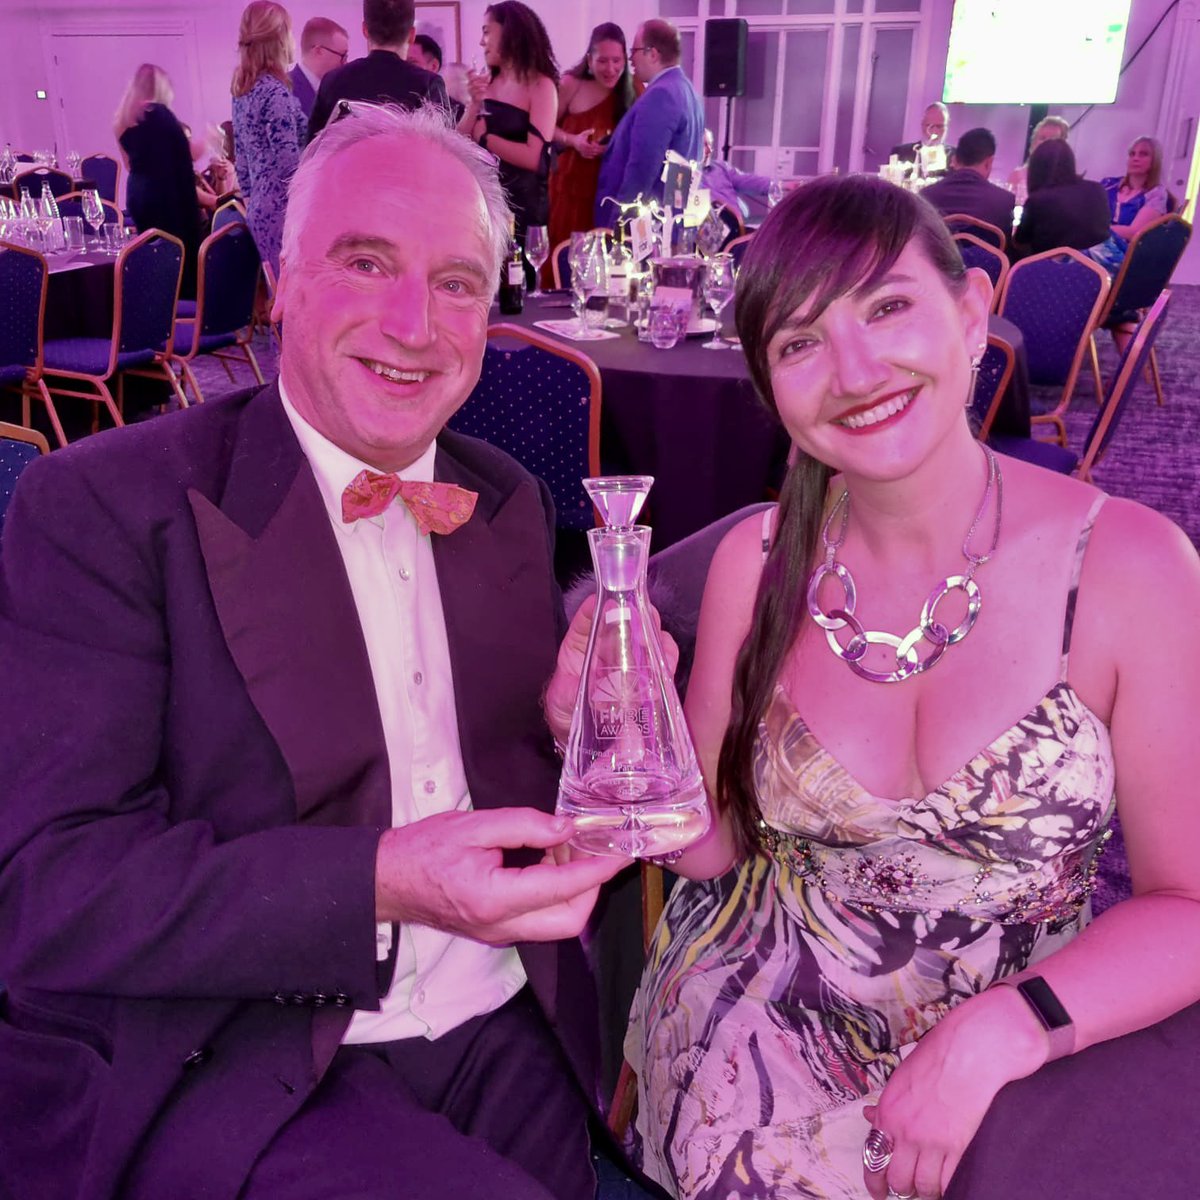 Feels great to be recognised by the industry & win an award for Operational Success at  #fieldmarketing #fmbeawards 
Bill & Laura have been doing #events to market client's products & services together for 16 years & immense thanks go to the team that work with us through it all